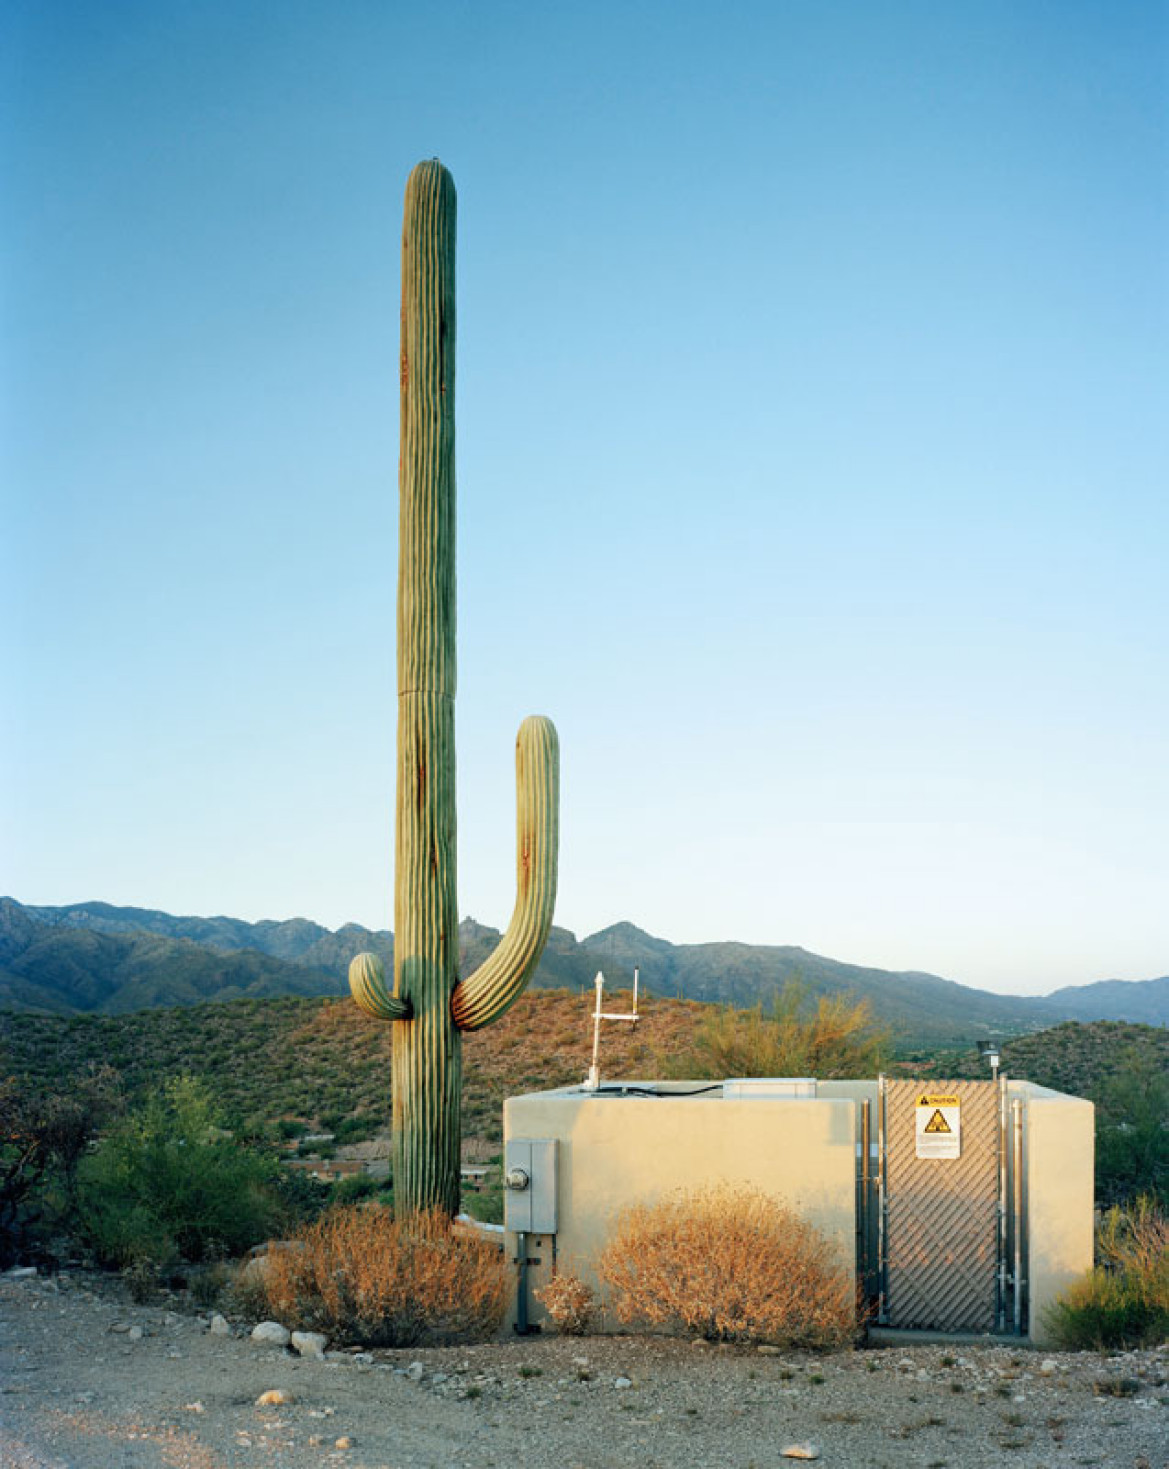 Scottsdale, Arizona, USA, 2006 (c) 2014 Robert Voit for the images, book published by Steidl